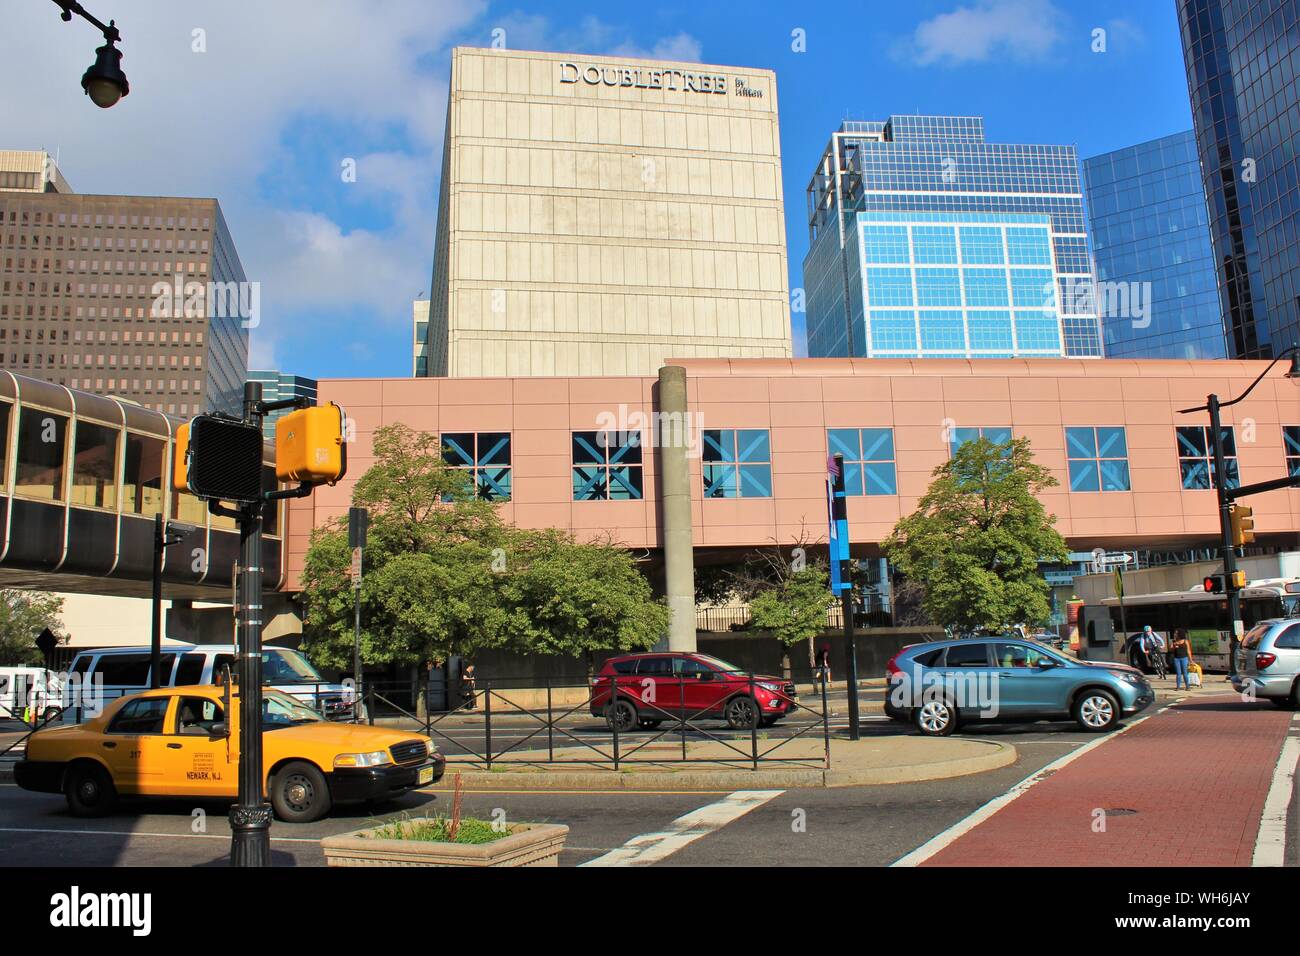 View across a busy highway, of the Double Tree Hilton Hotel in Newark, NJ, taken from outside the Newark Penn Station, opposite. Stock Photo